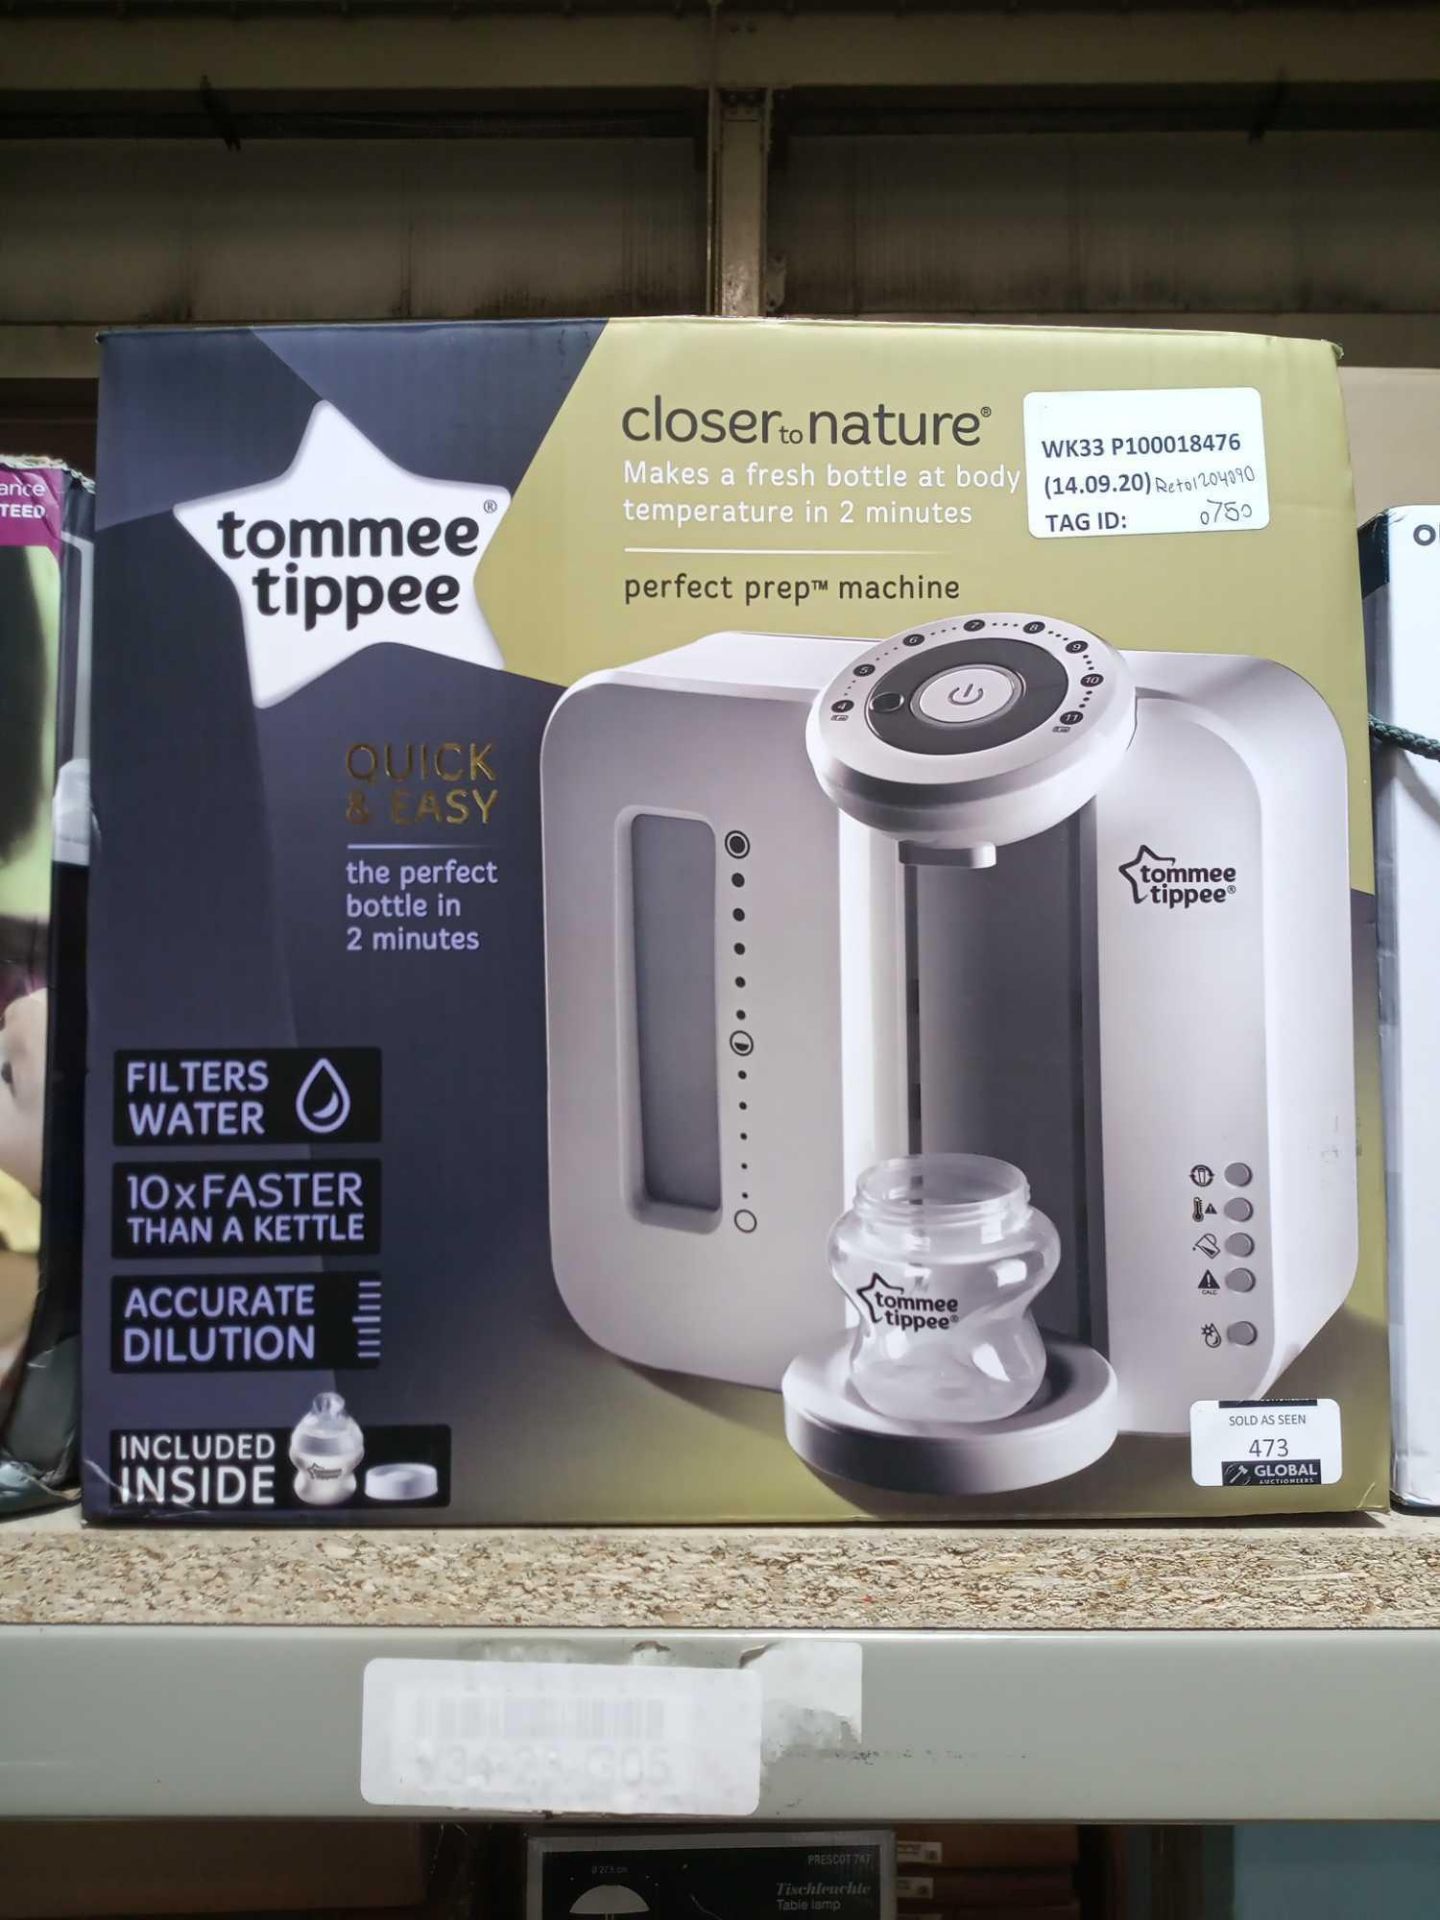 Rrp £75 Boxed Tommee Tippee Closer To Nature Perfect Preparation Machine - Image 2 of 2